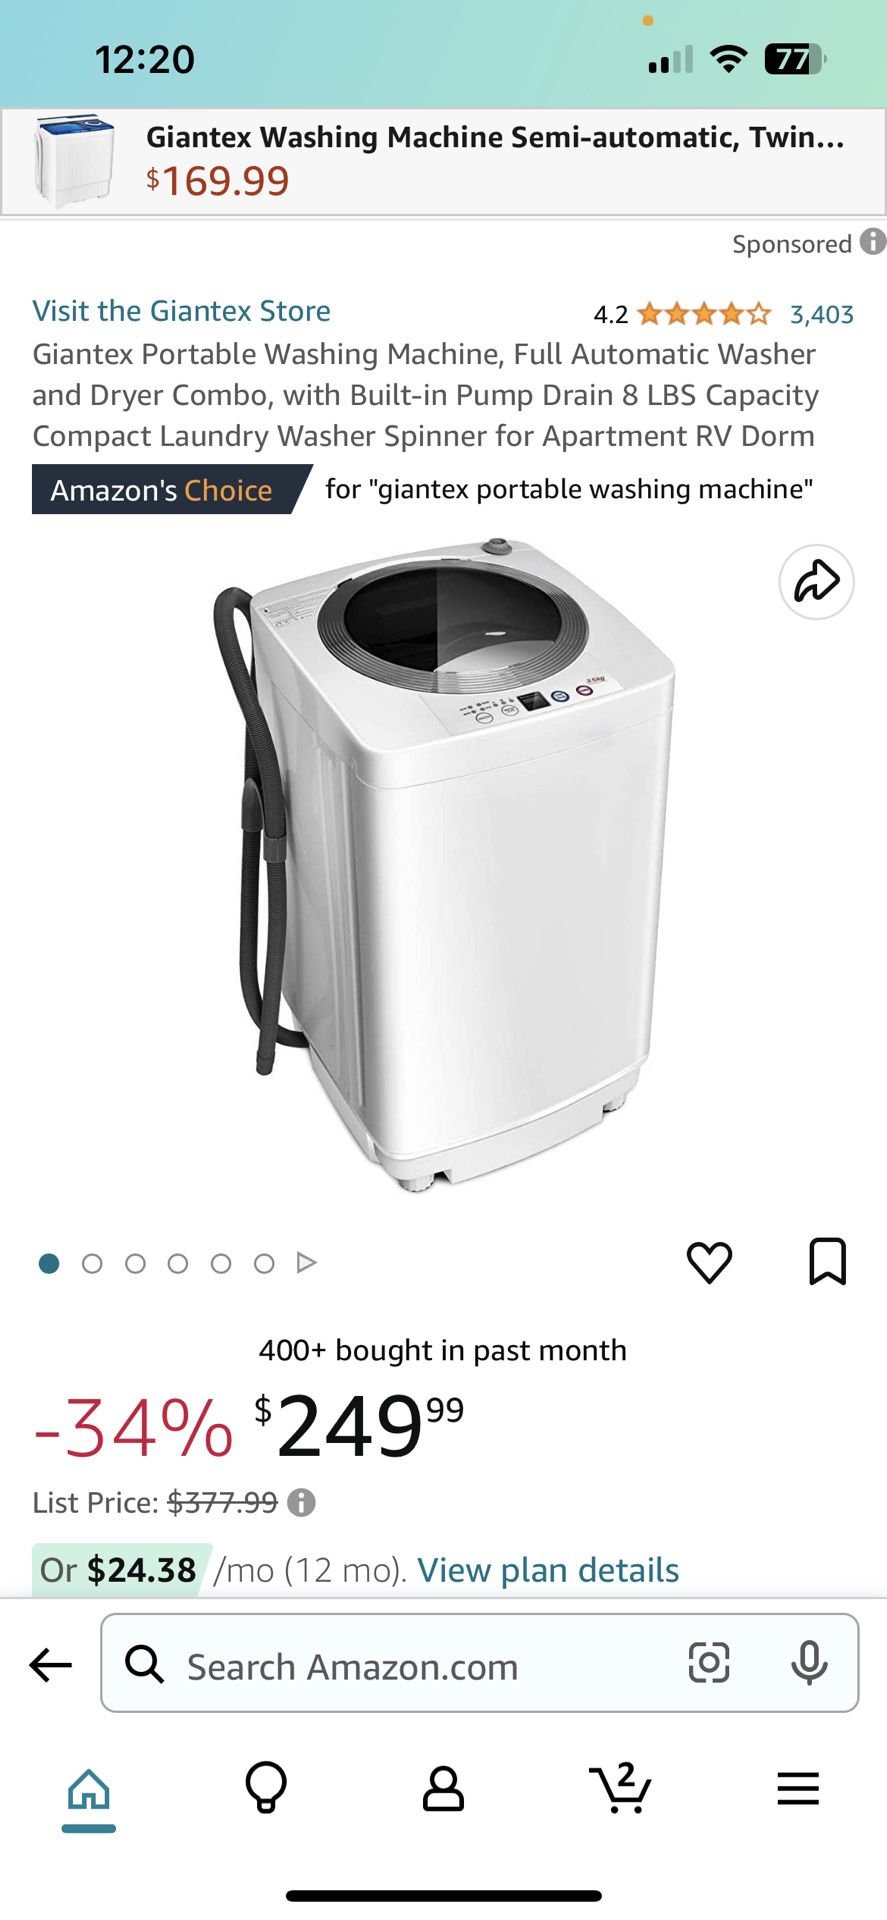 Kuppet Portable Washing Machine for Sale in Glen Cove, NY - OfferUp